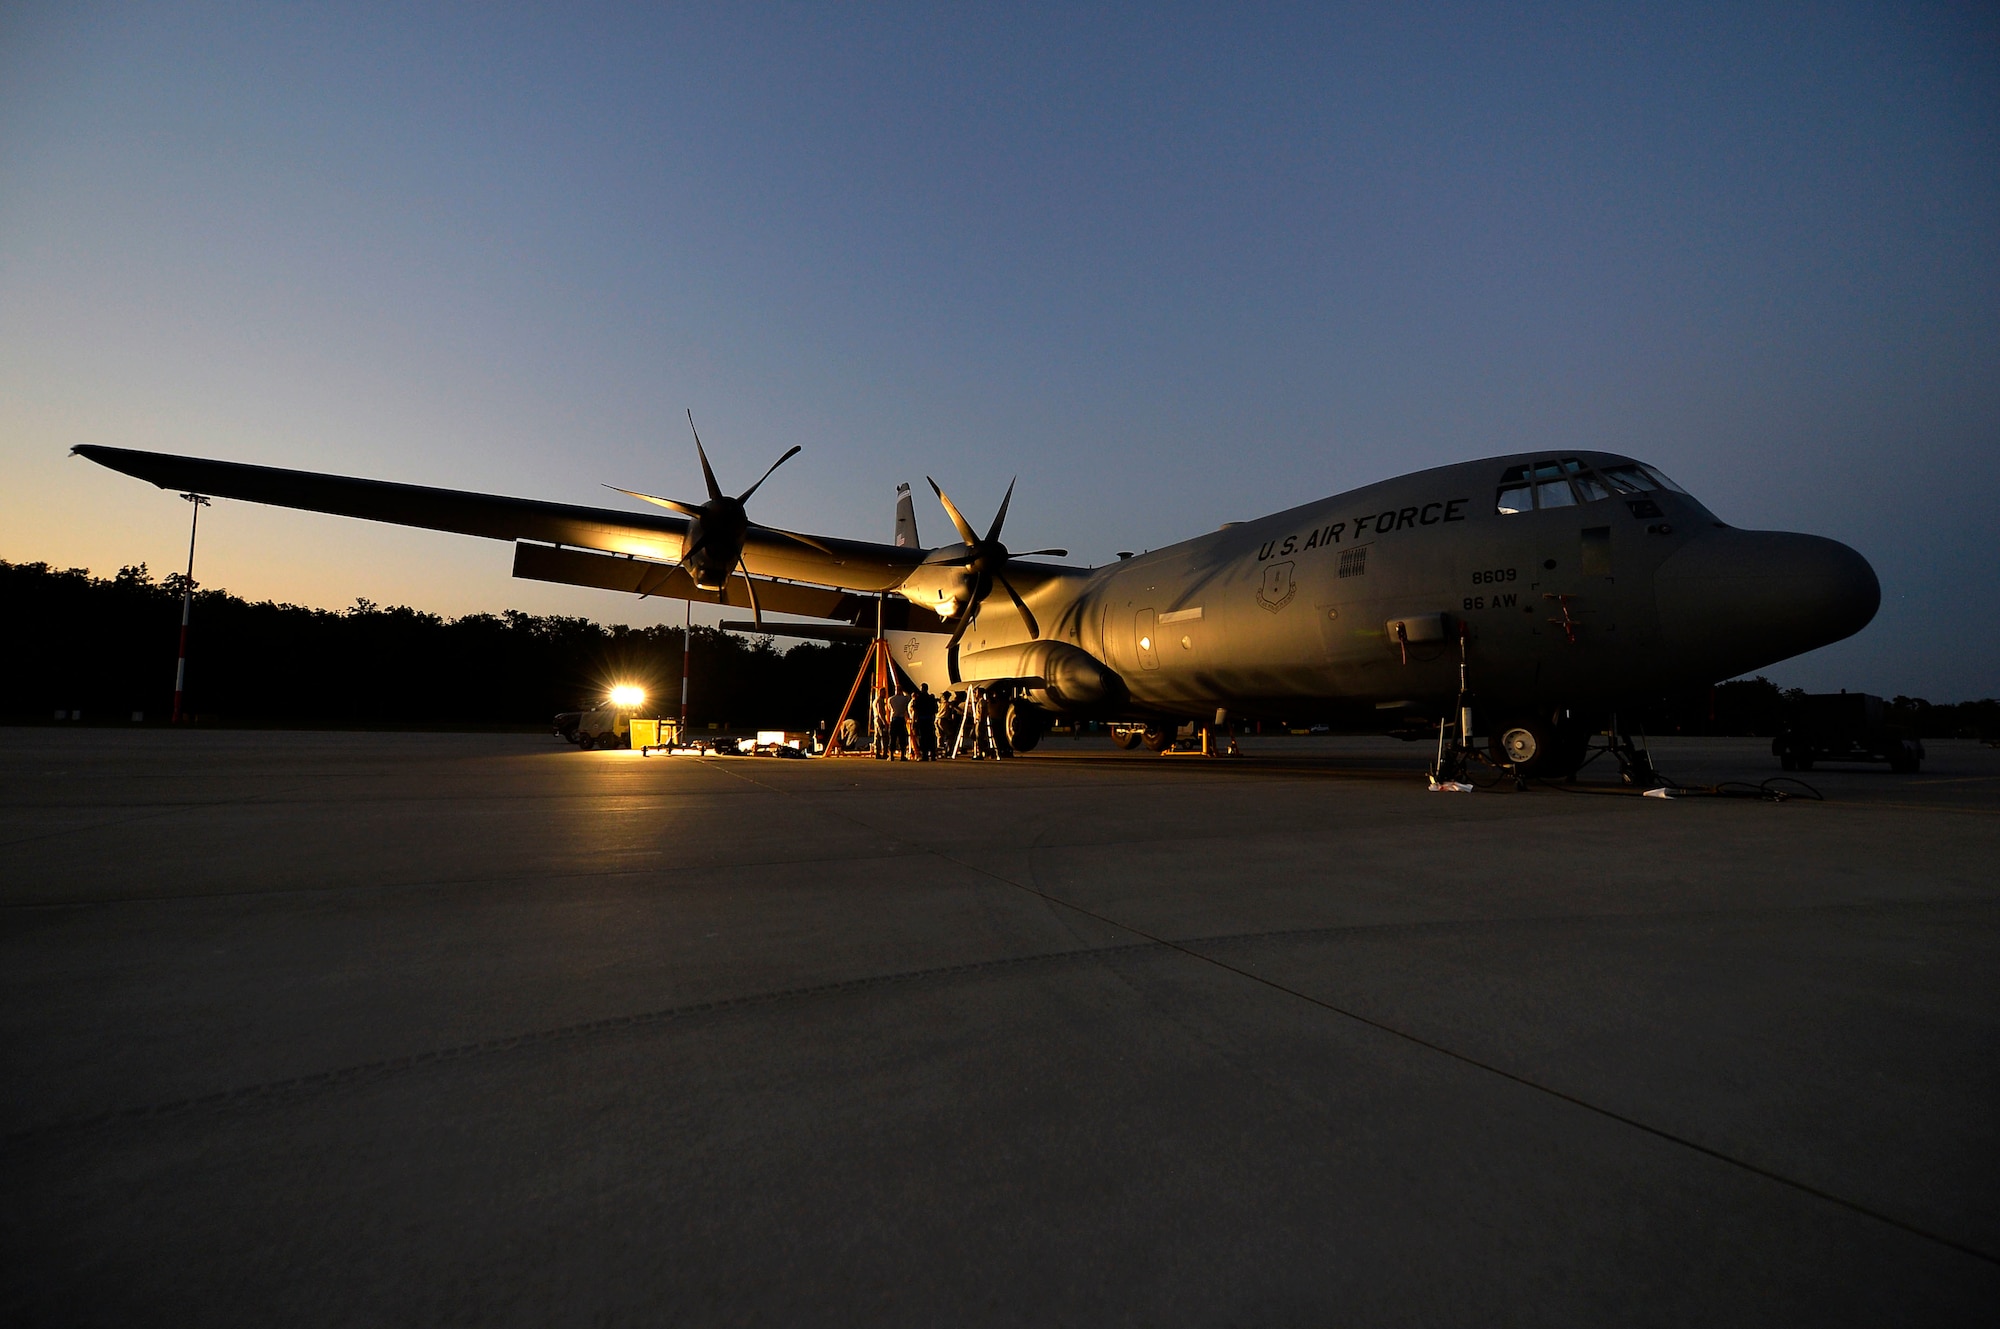 U.S. Airmen assigned to the 86th Aircraft Maintenance Squadron conduct maintenance work on a U.S. C-130J Super Hercules on Powidz Air Base, Poland. The Airmen worked through the night replacing one of its struts, which are used in landing gear to absorb shock. (U.S. Air Force photo by Senior Airman Joshua Magbanua)